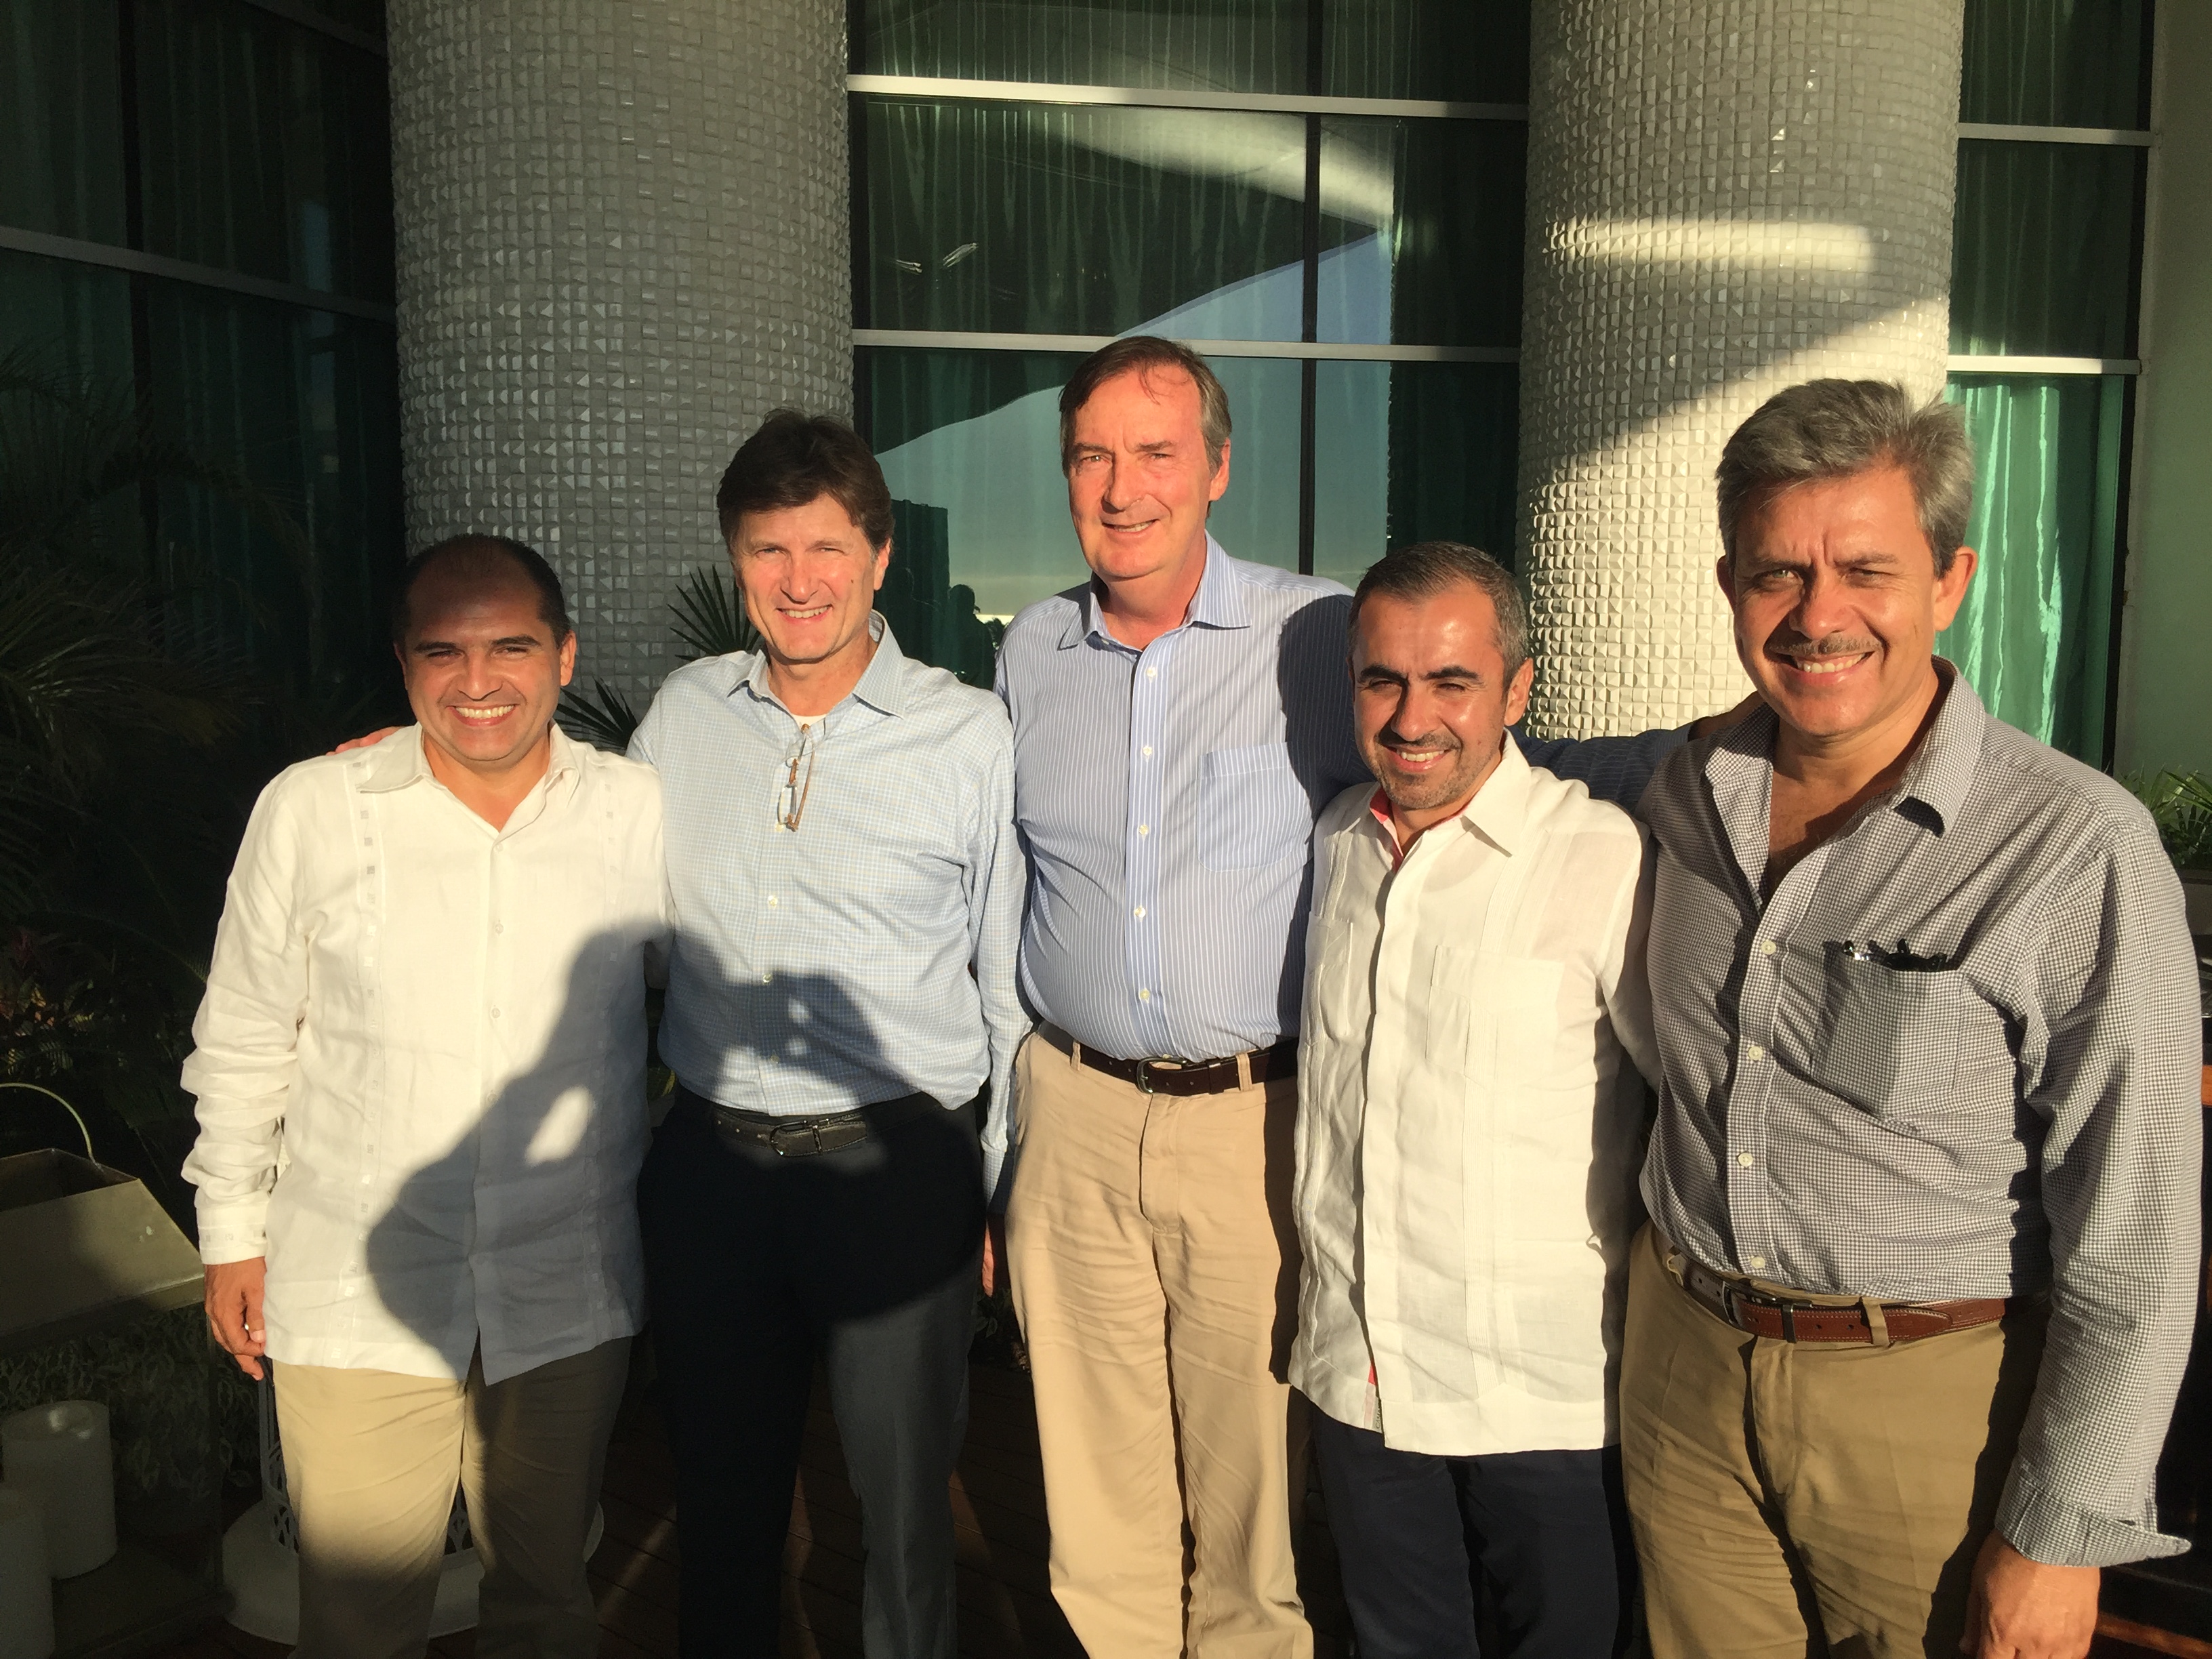 Meeting Sectur to present PPDU for Punta Mita